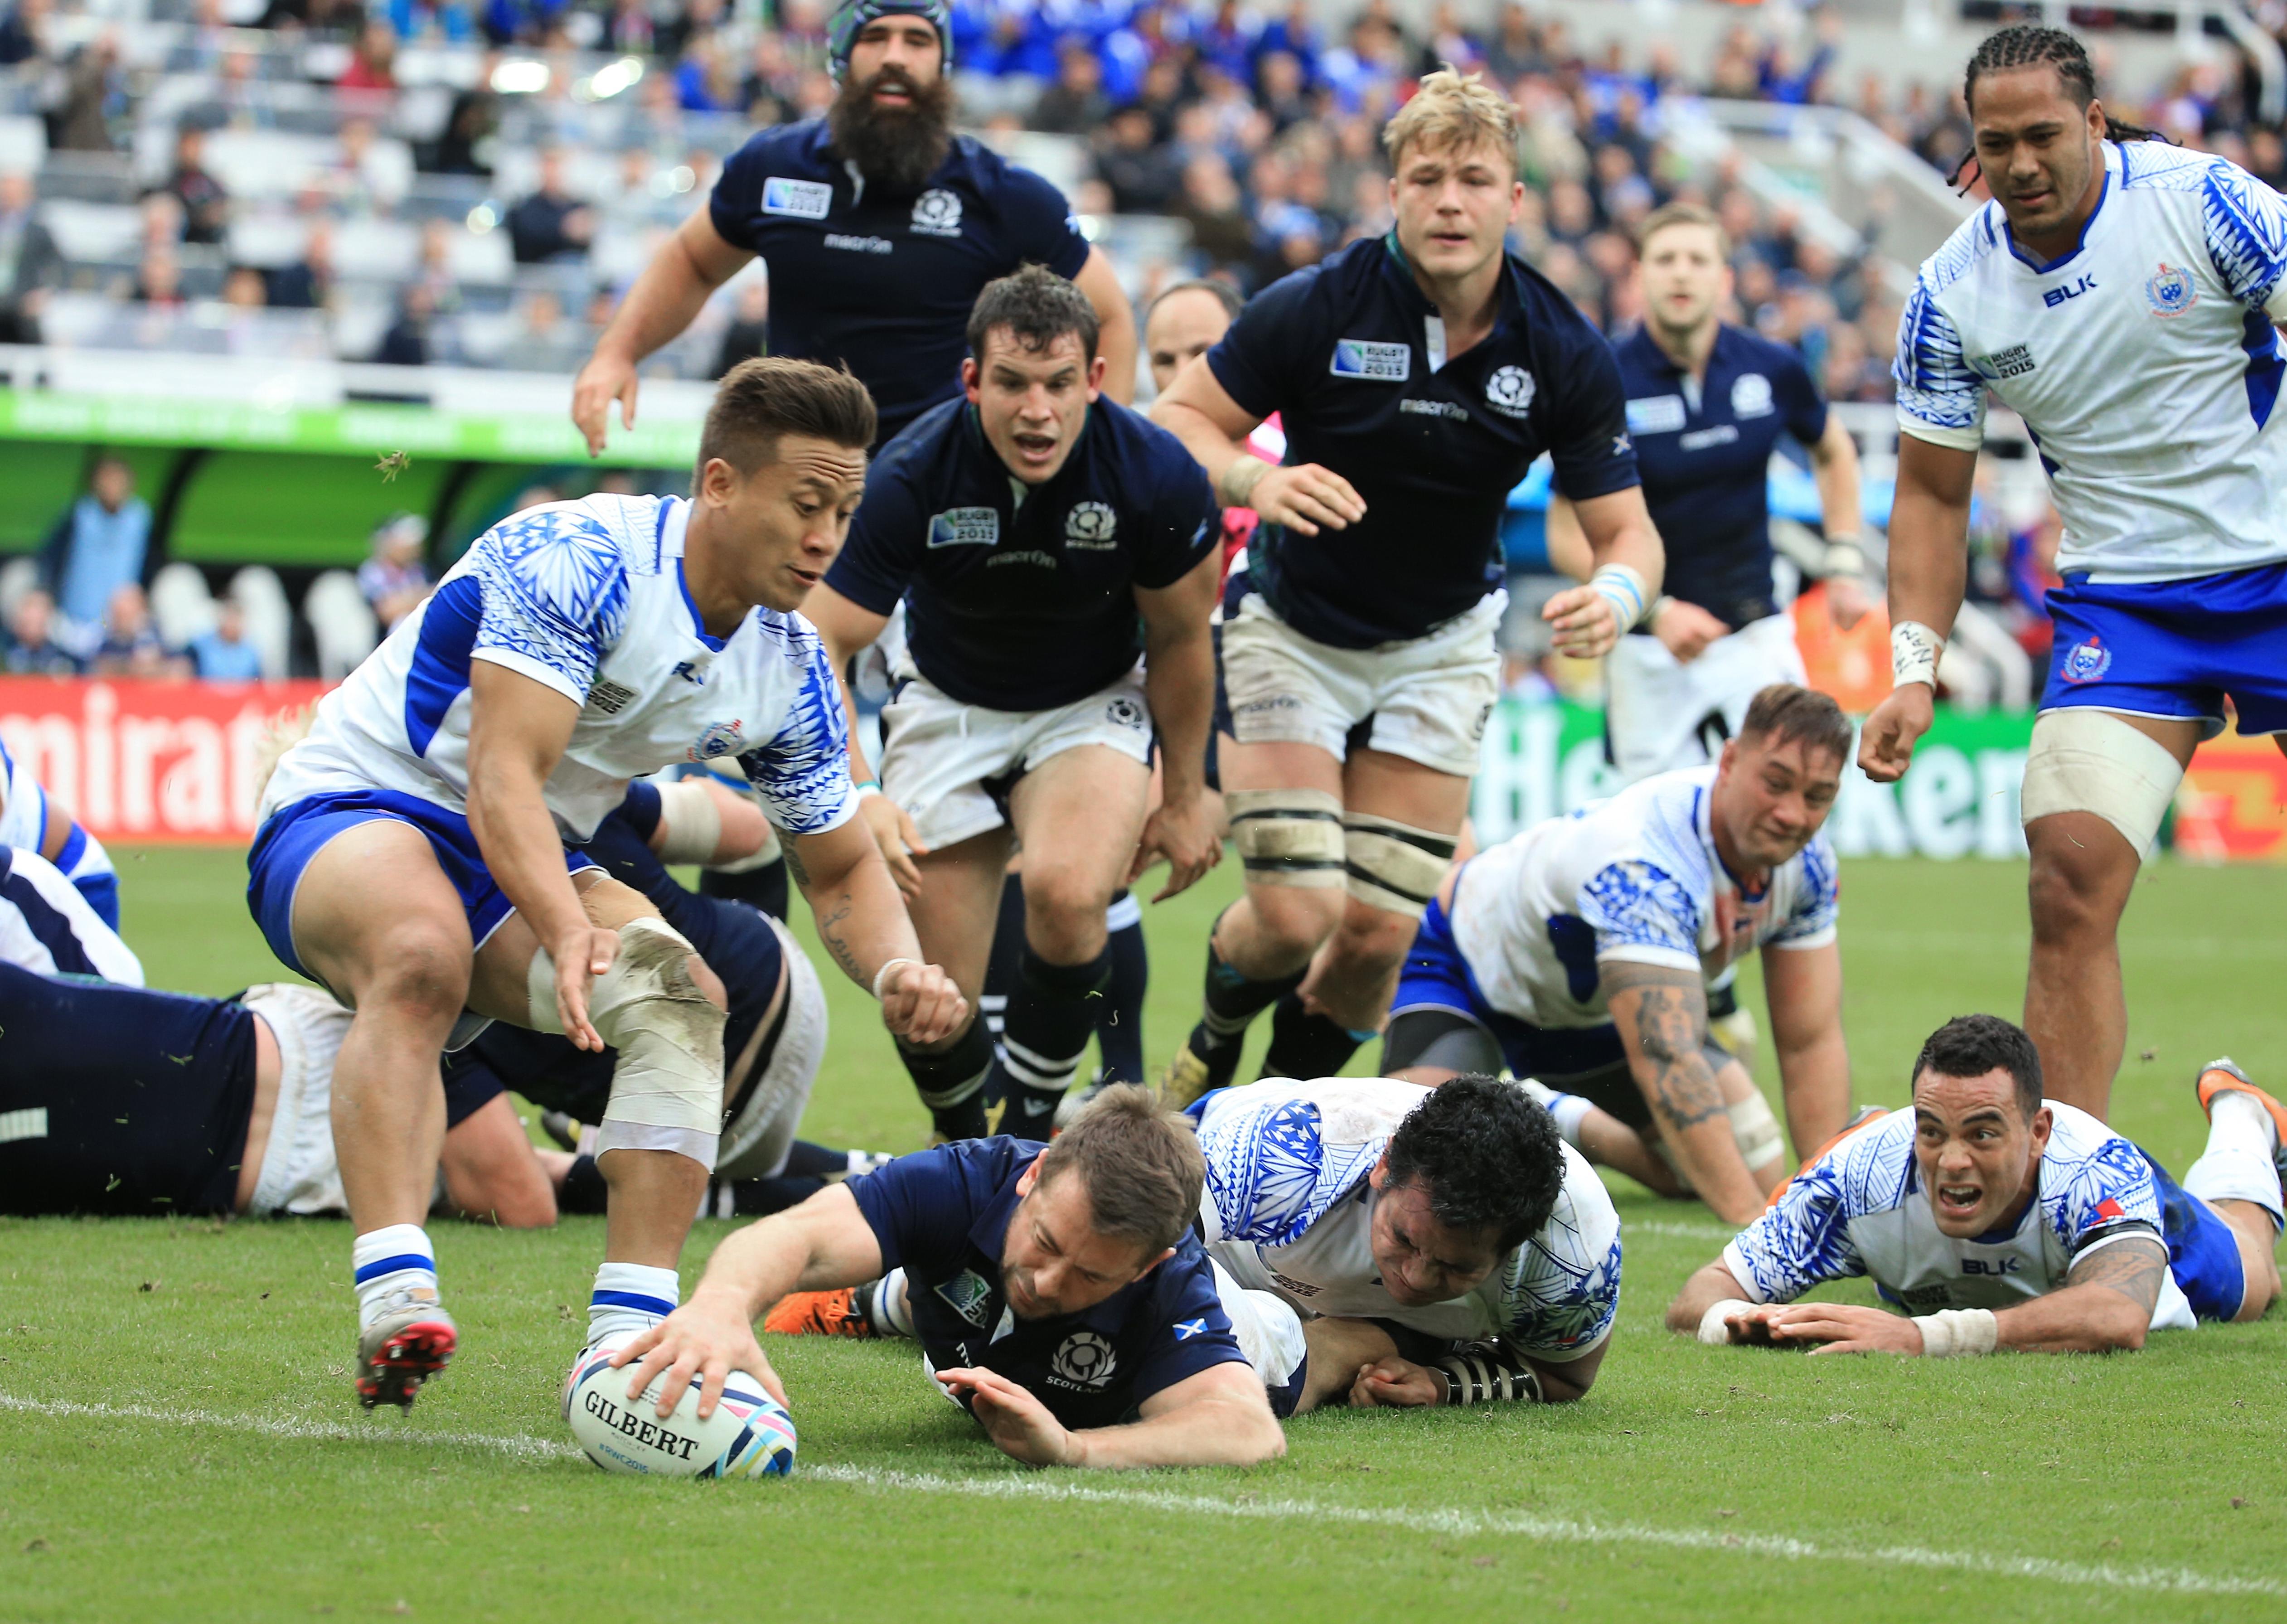 Laidlaw contributes a crucial 26 points - including the match-winning third try- in a 36 - 33 victory over Samoa in October 2015.